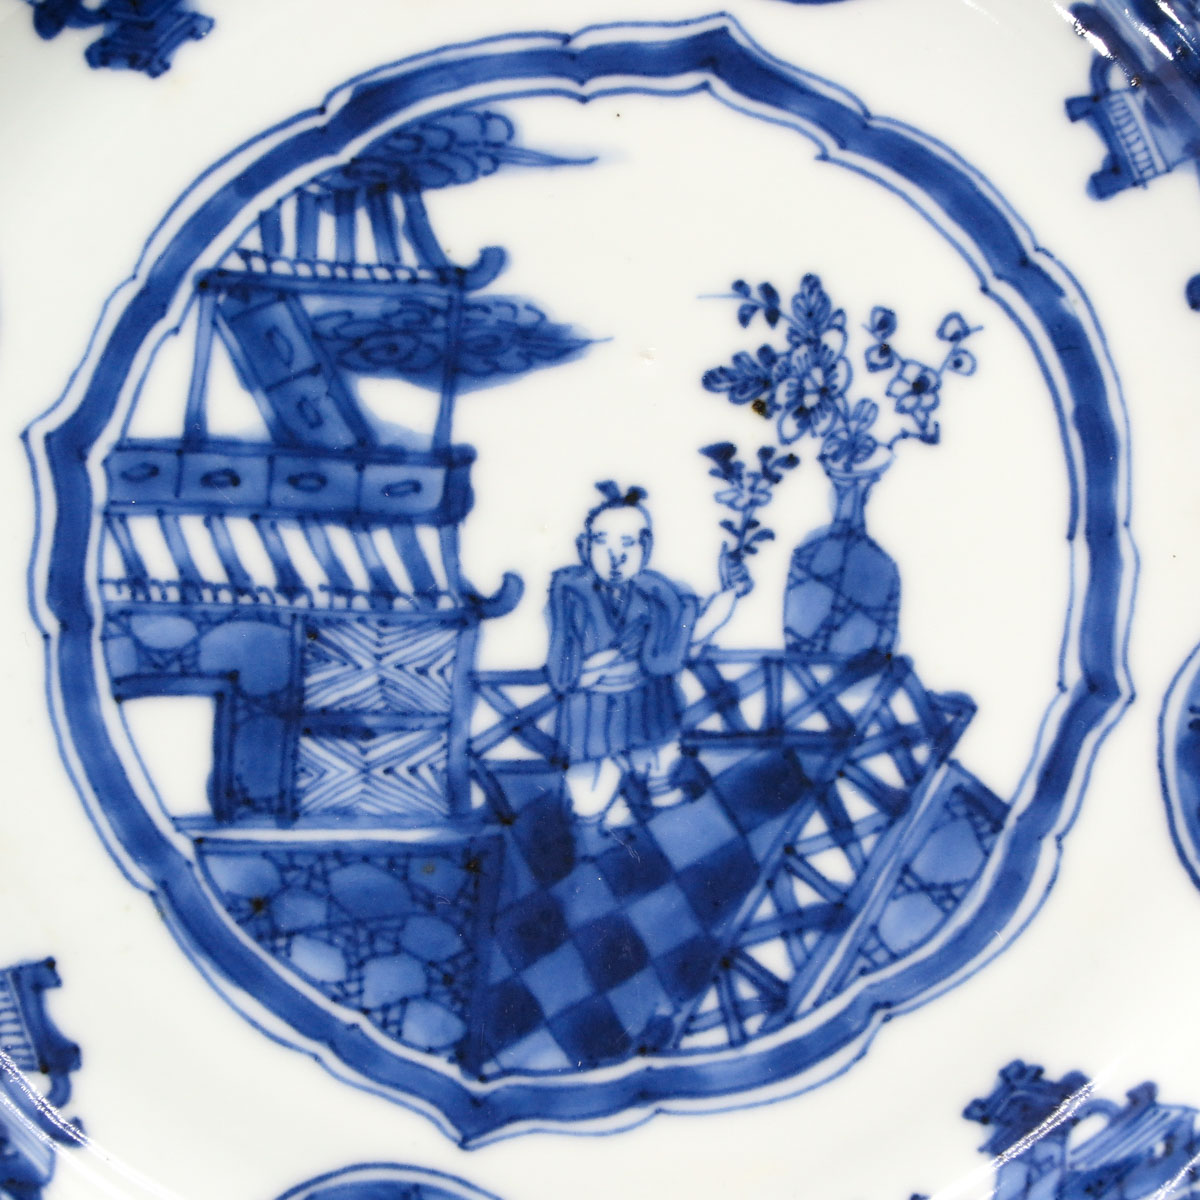 A Blue and White Decor Plate - Image 3 of 3